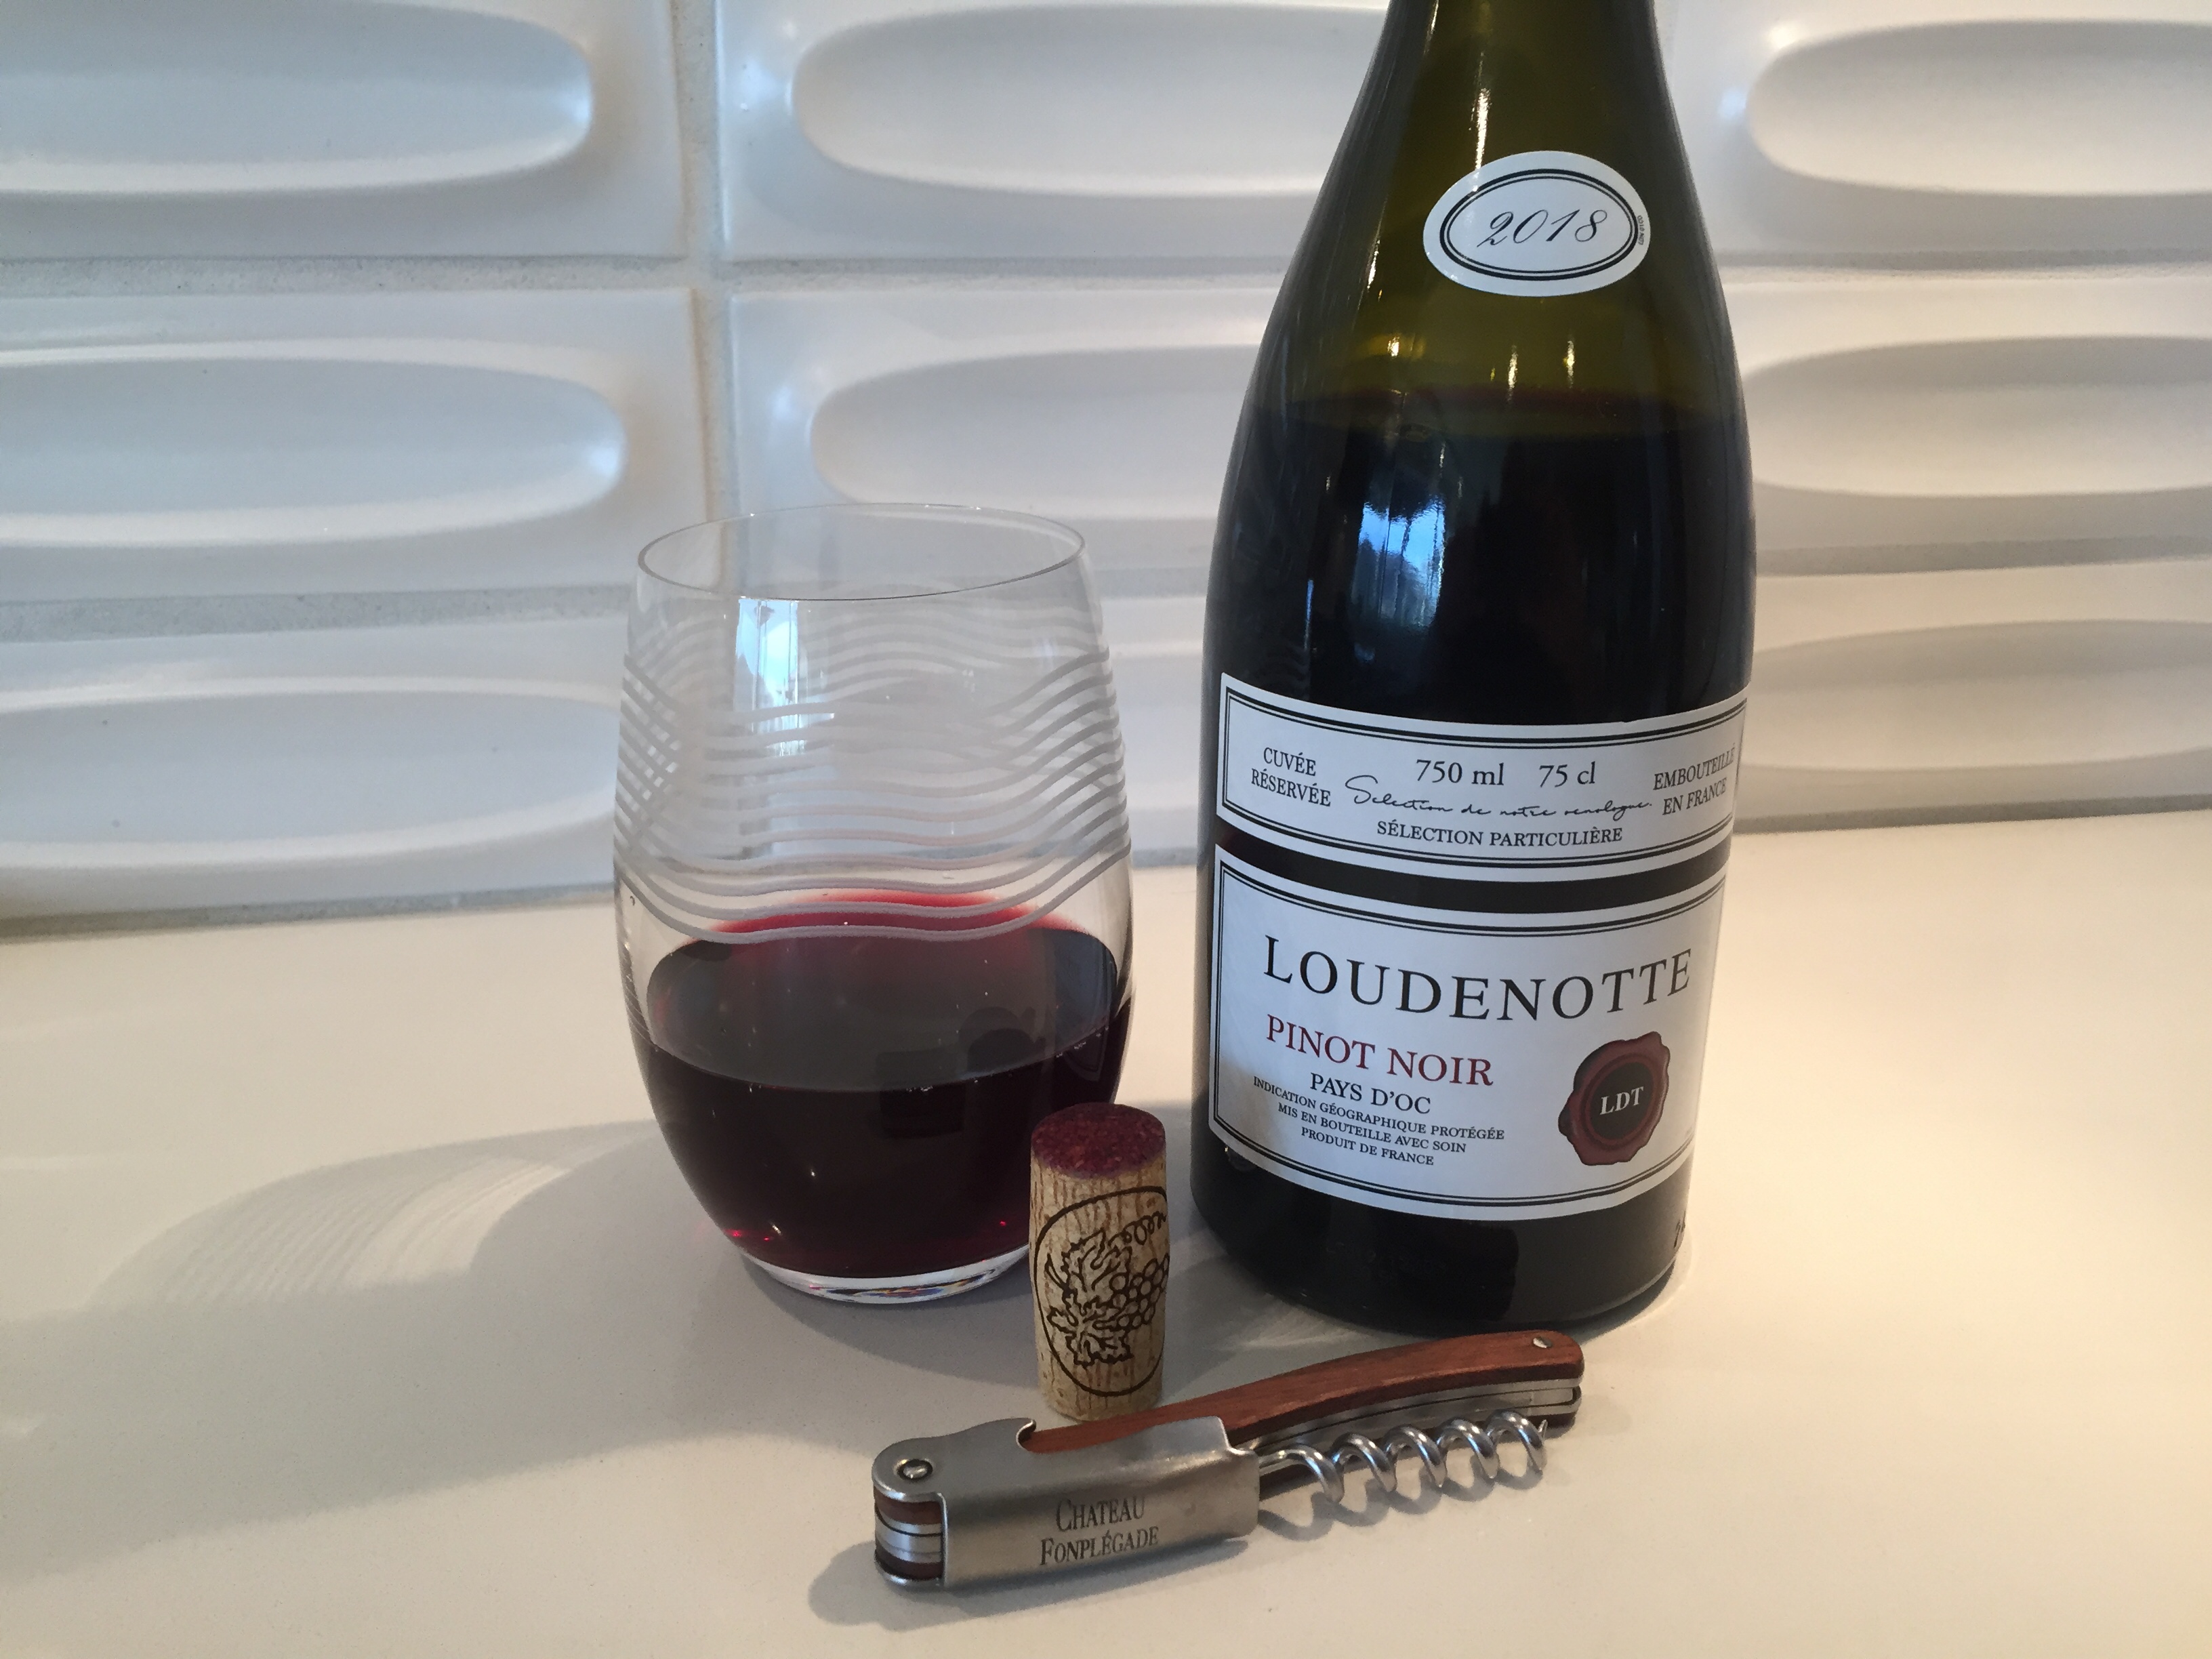 Bottle and glass of 2018 Loudenotte Pinot Noir from Trader Joe's